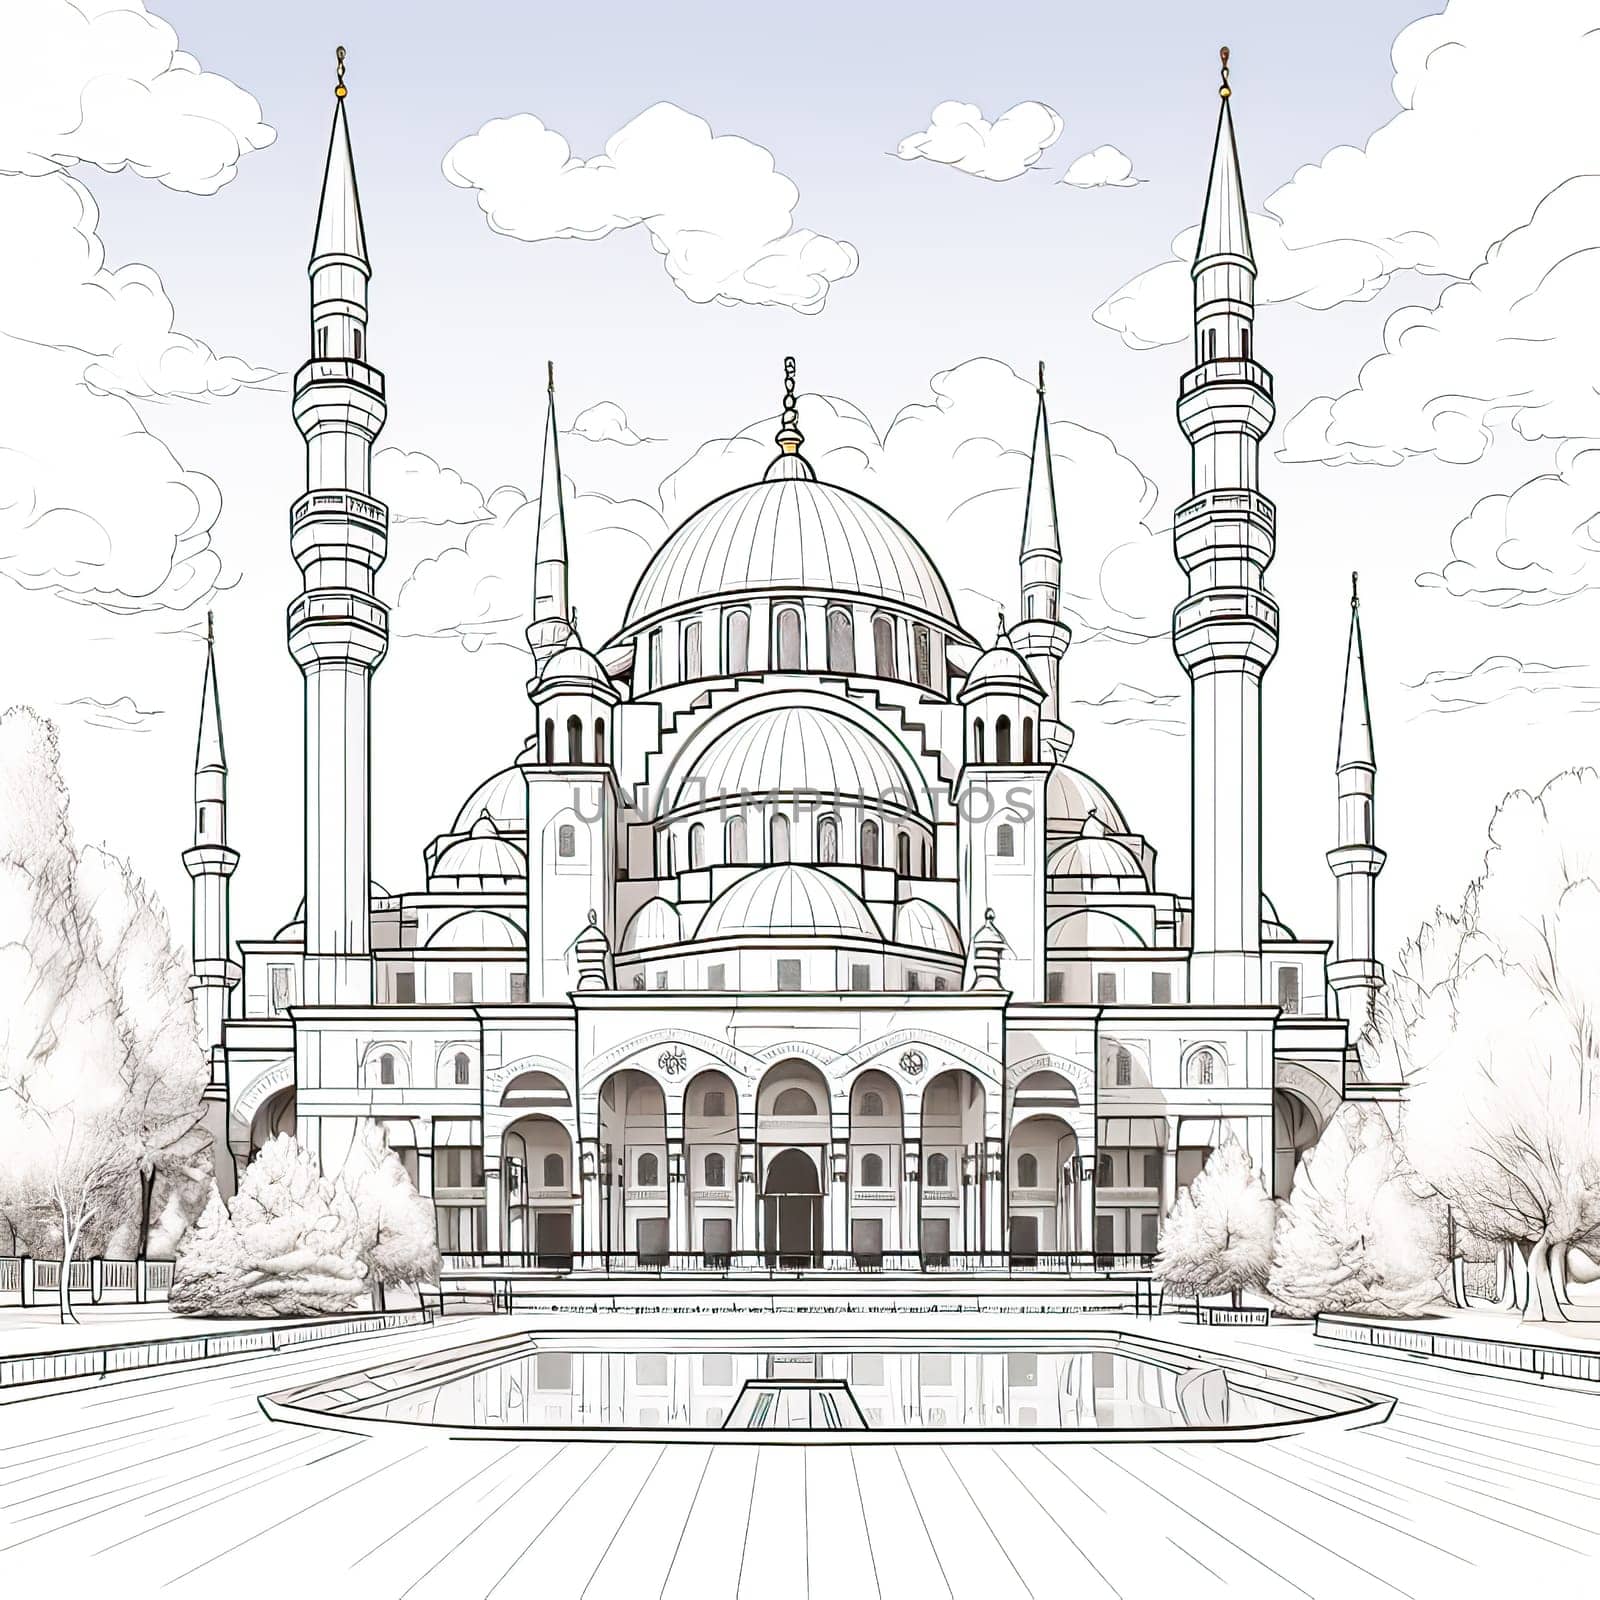 Turkish Treasure, Watercolor liner sketch of an ancient temple in Turkish style, a testament to architectural beauty